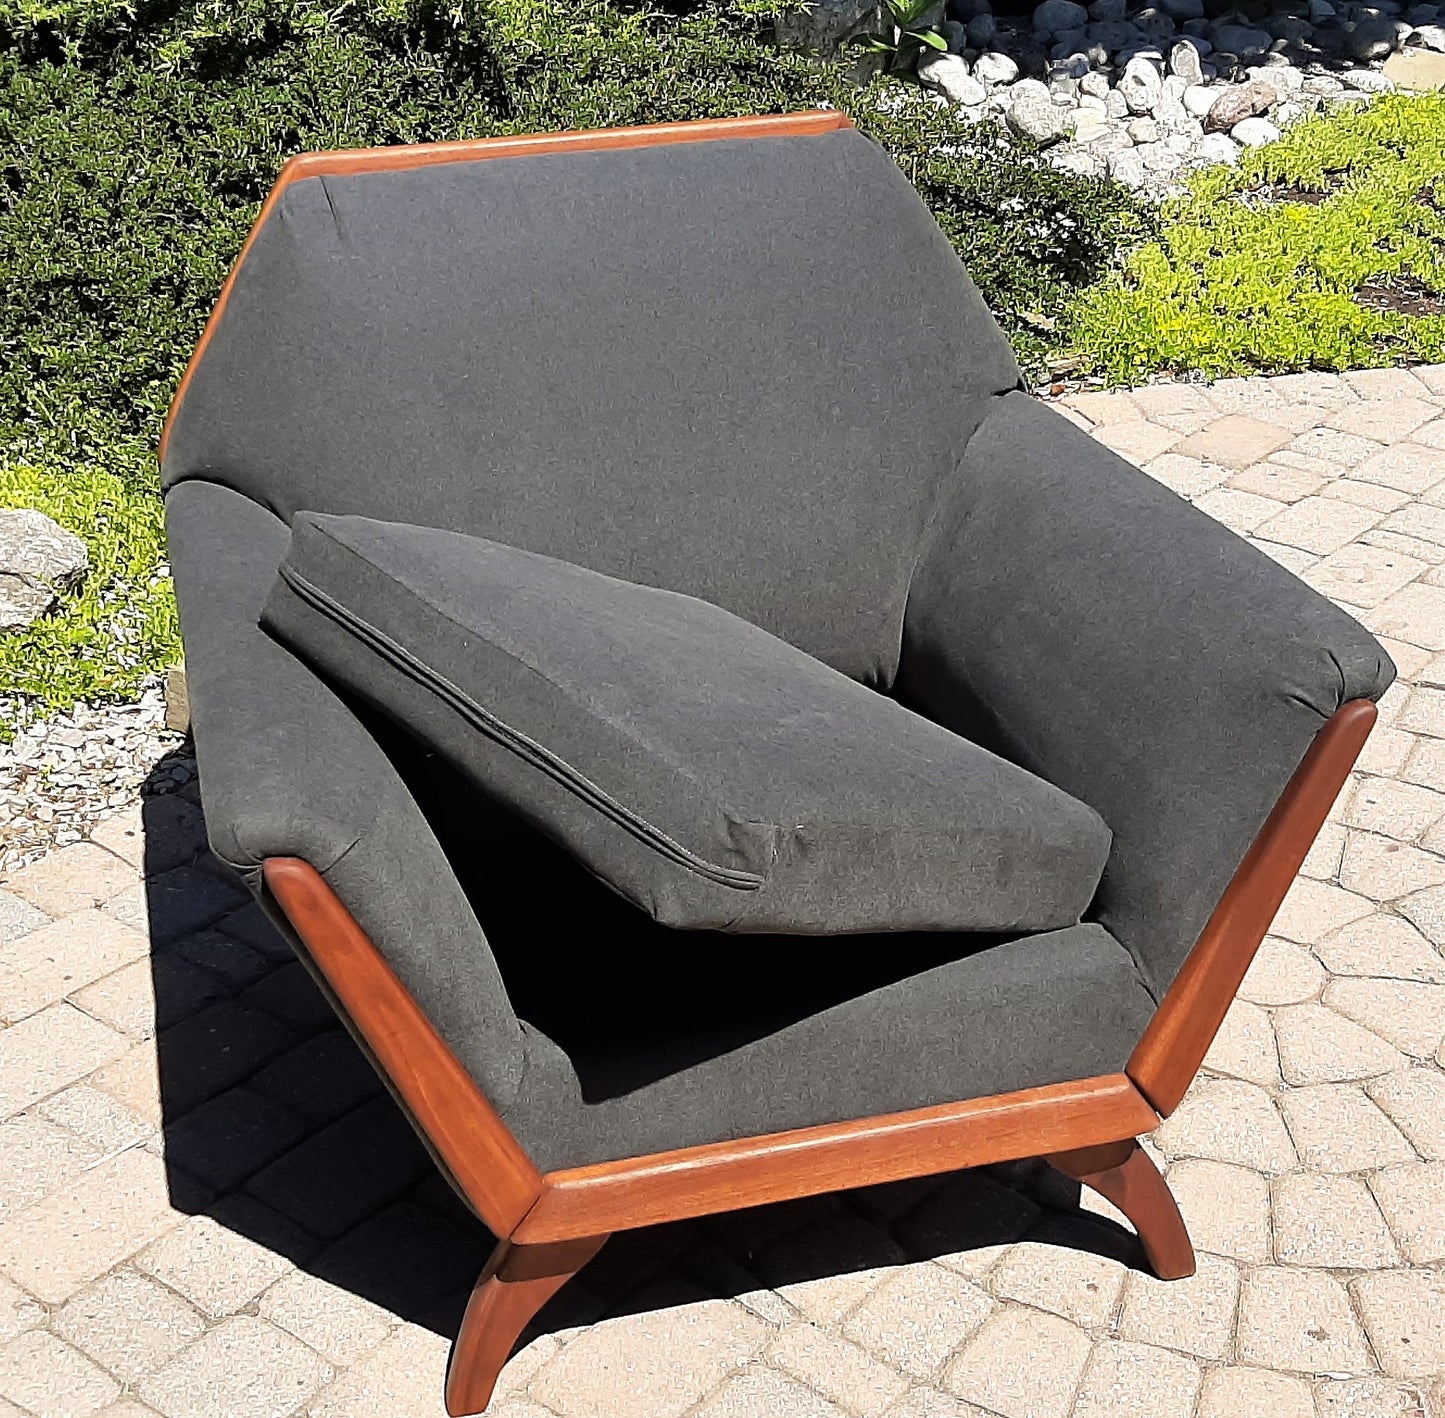 REFINISHED MCM Walnut lounge chair w NEW charcoal wool upholstery & spring base, Perfect